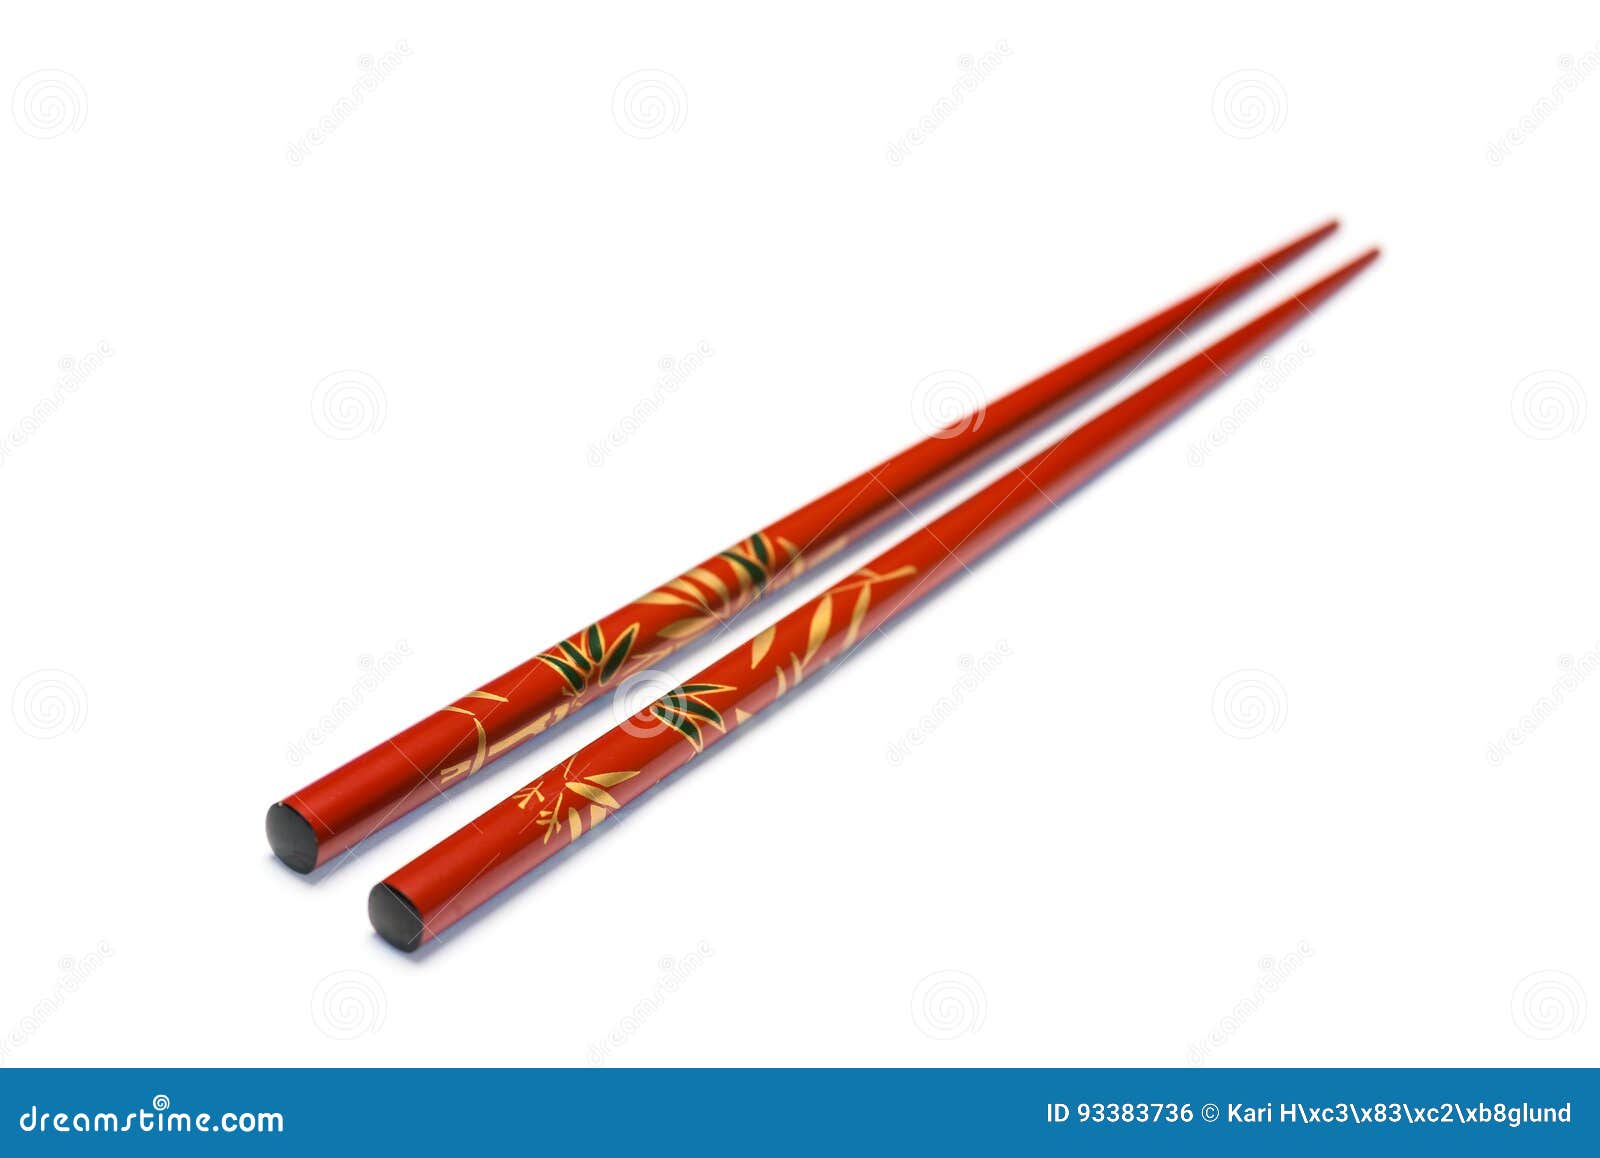 chopsticks on white background with selective focus